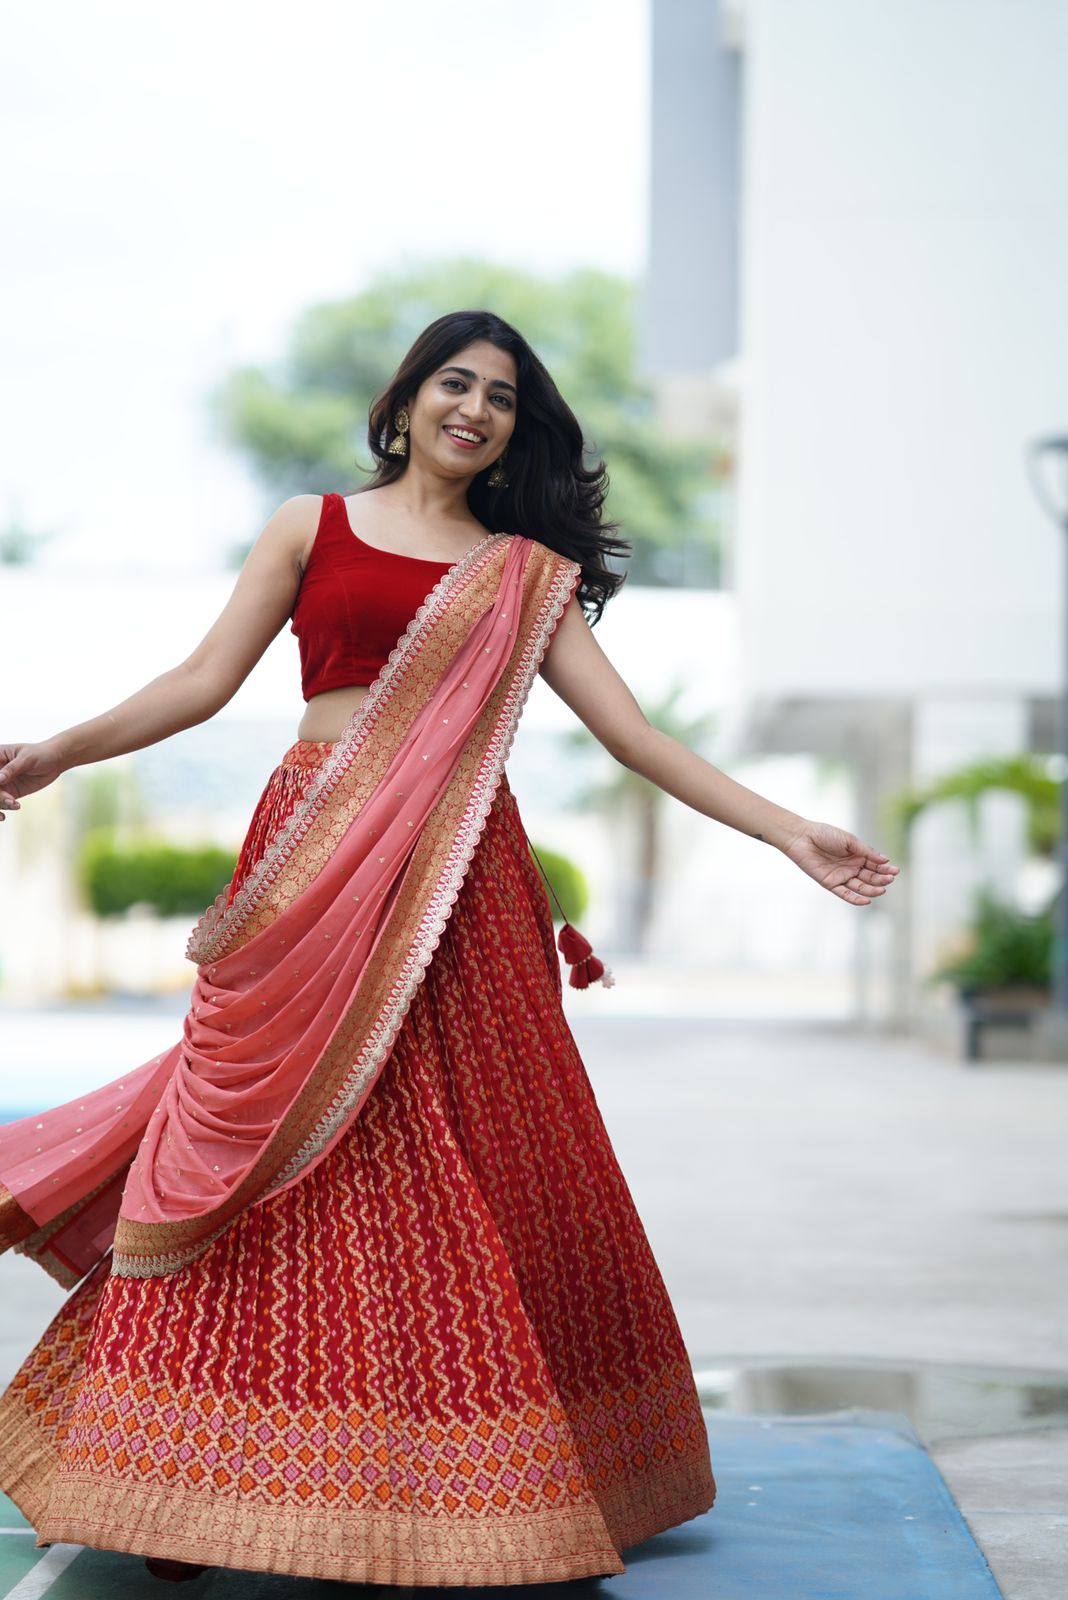 Alternative style of Red Bandani Lehenga showcased, offering a fresh take on classic red with unique patterns and design elements